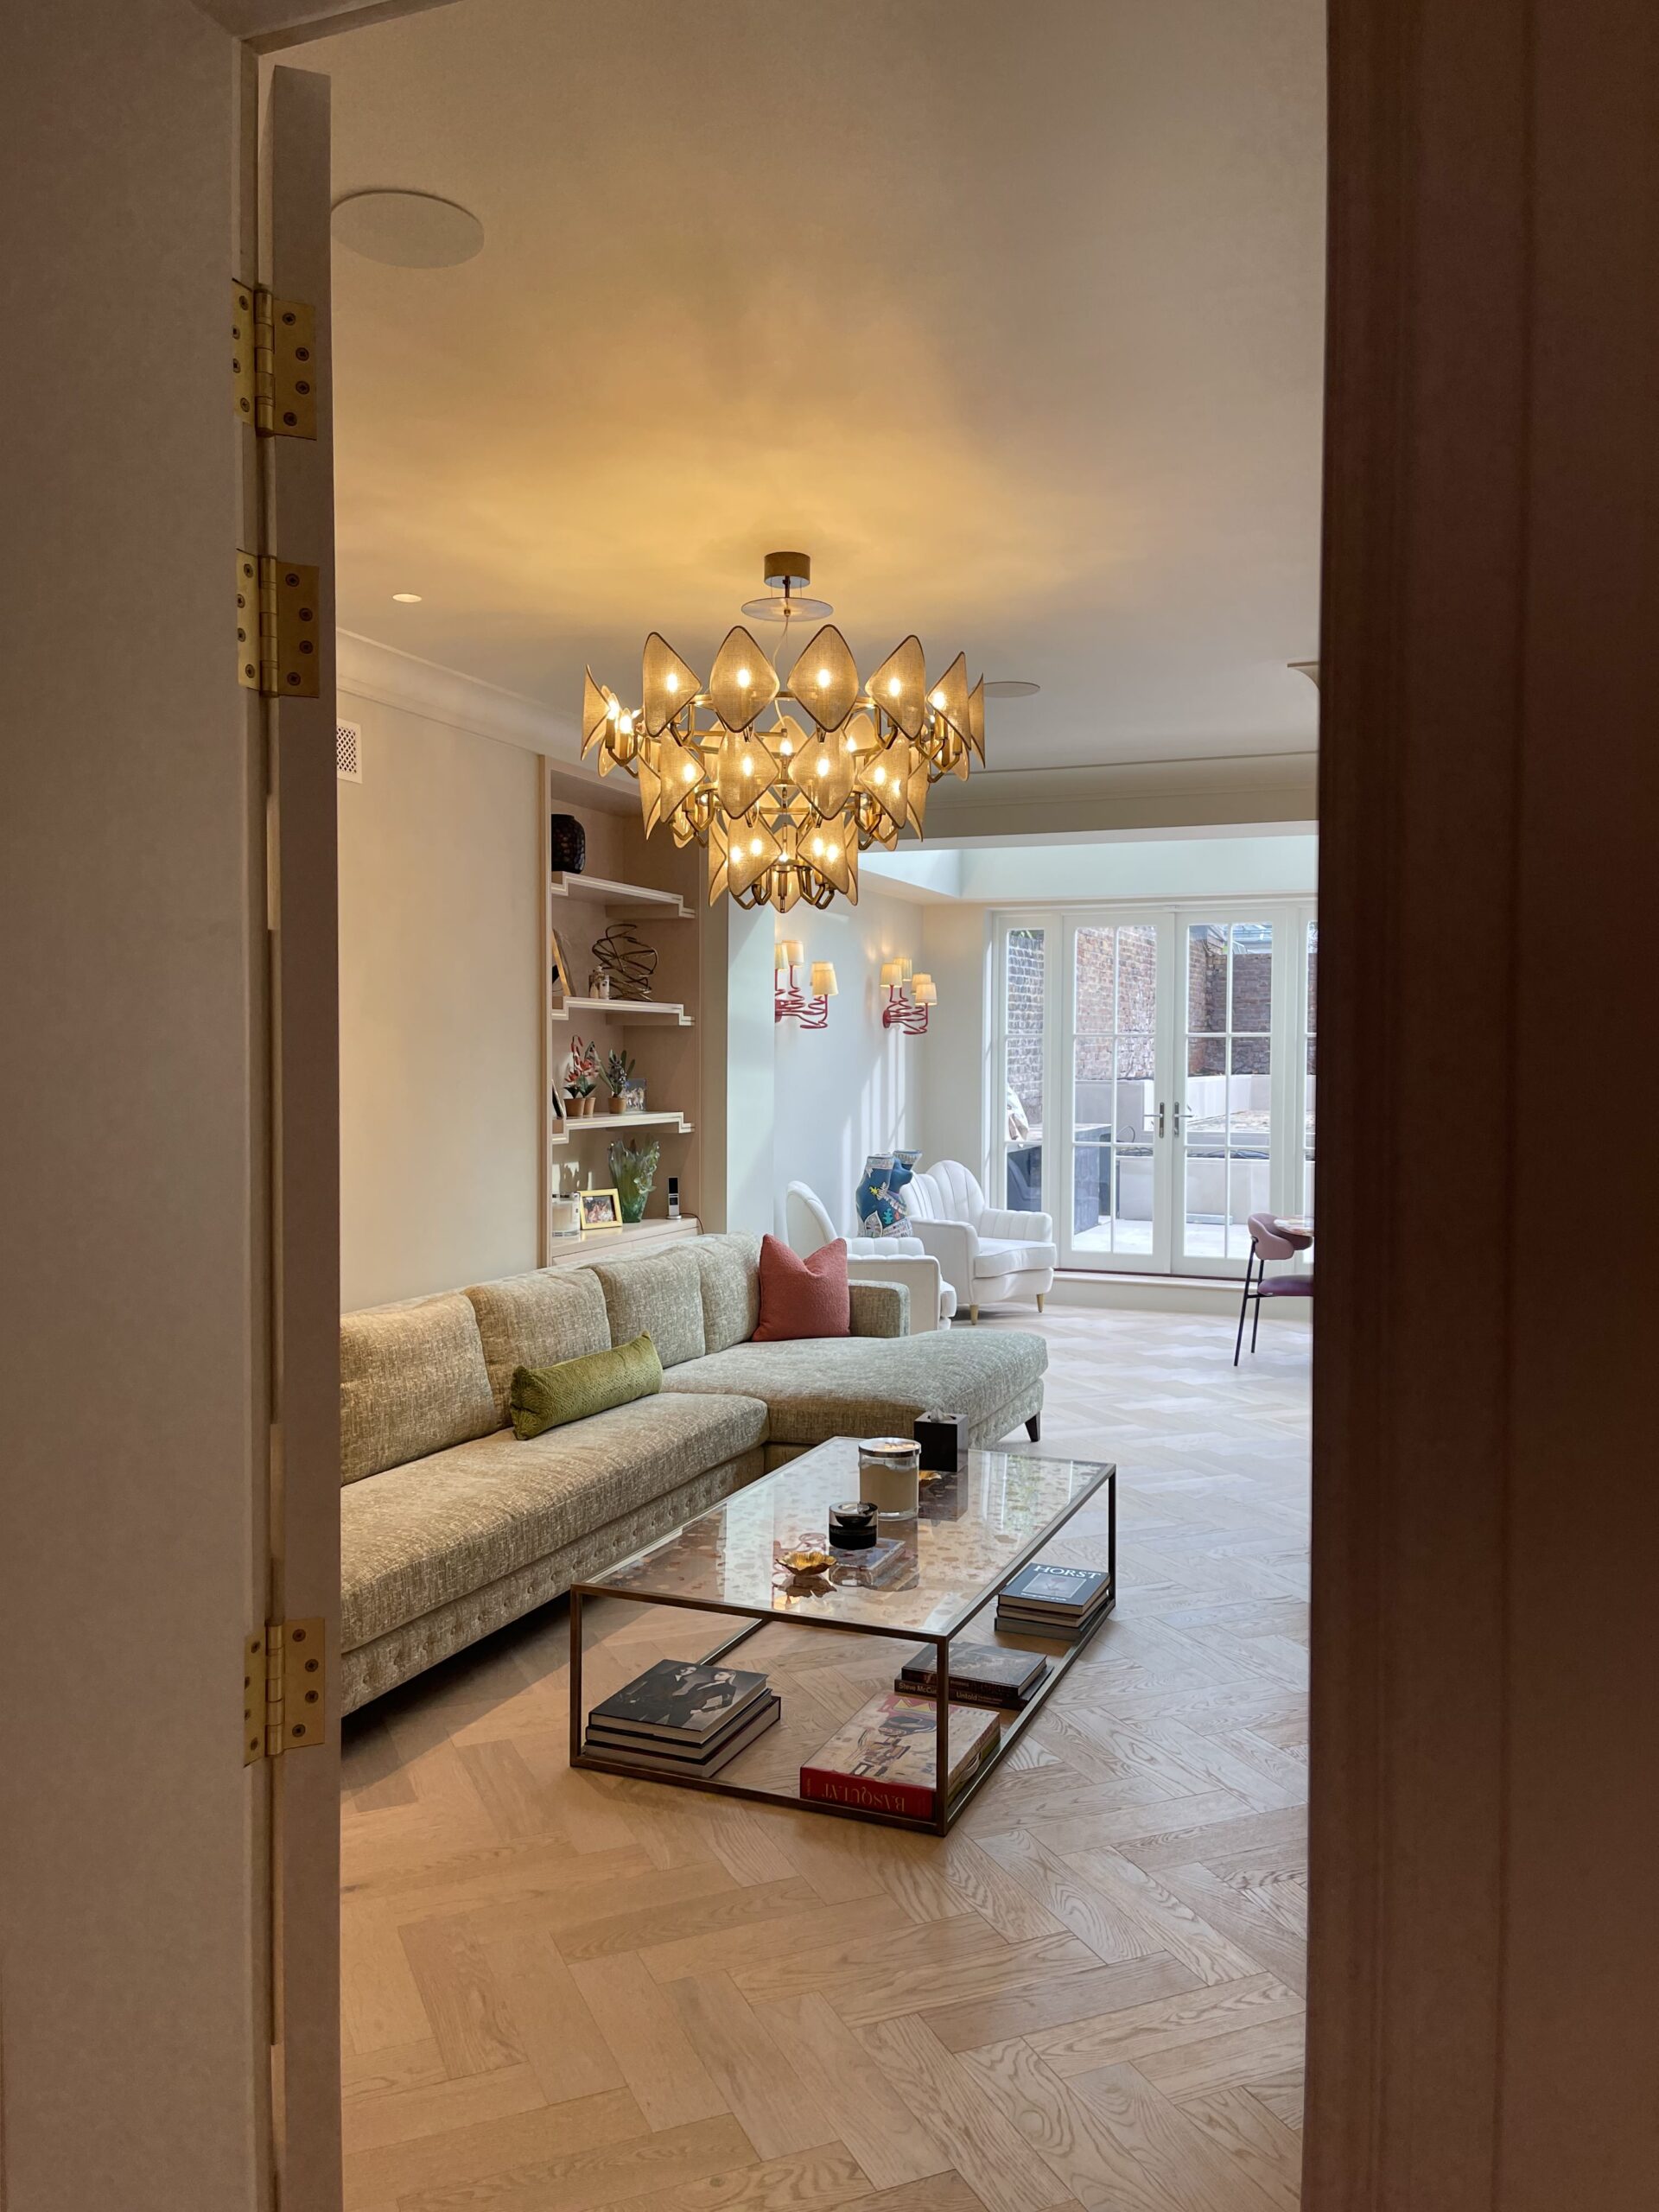 Door opening on a living area with parquet flooring, statement chandelier and in-ceiling speakers